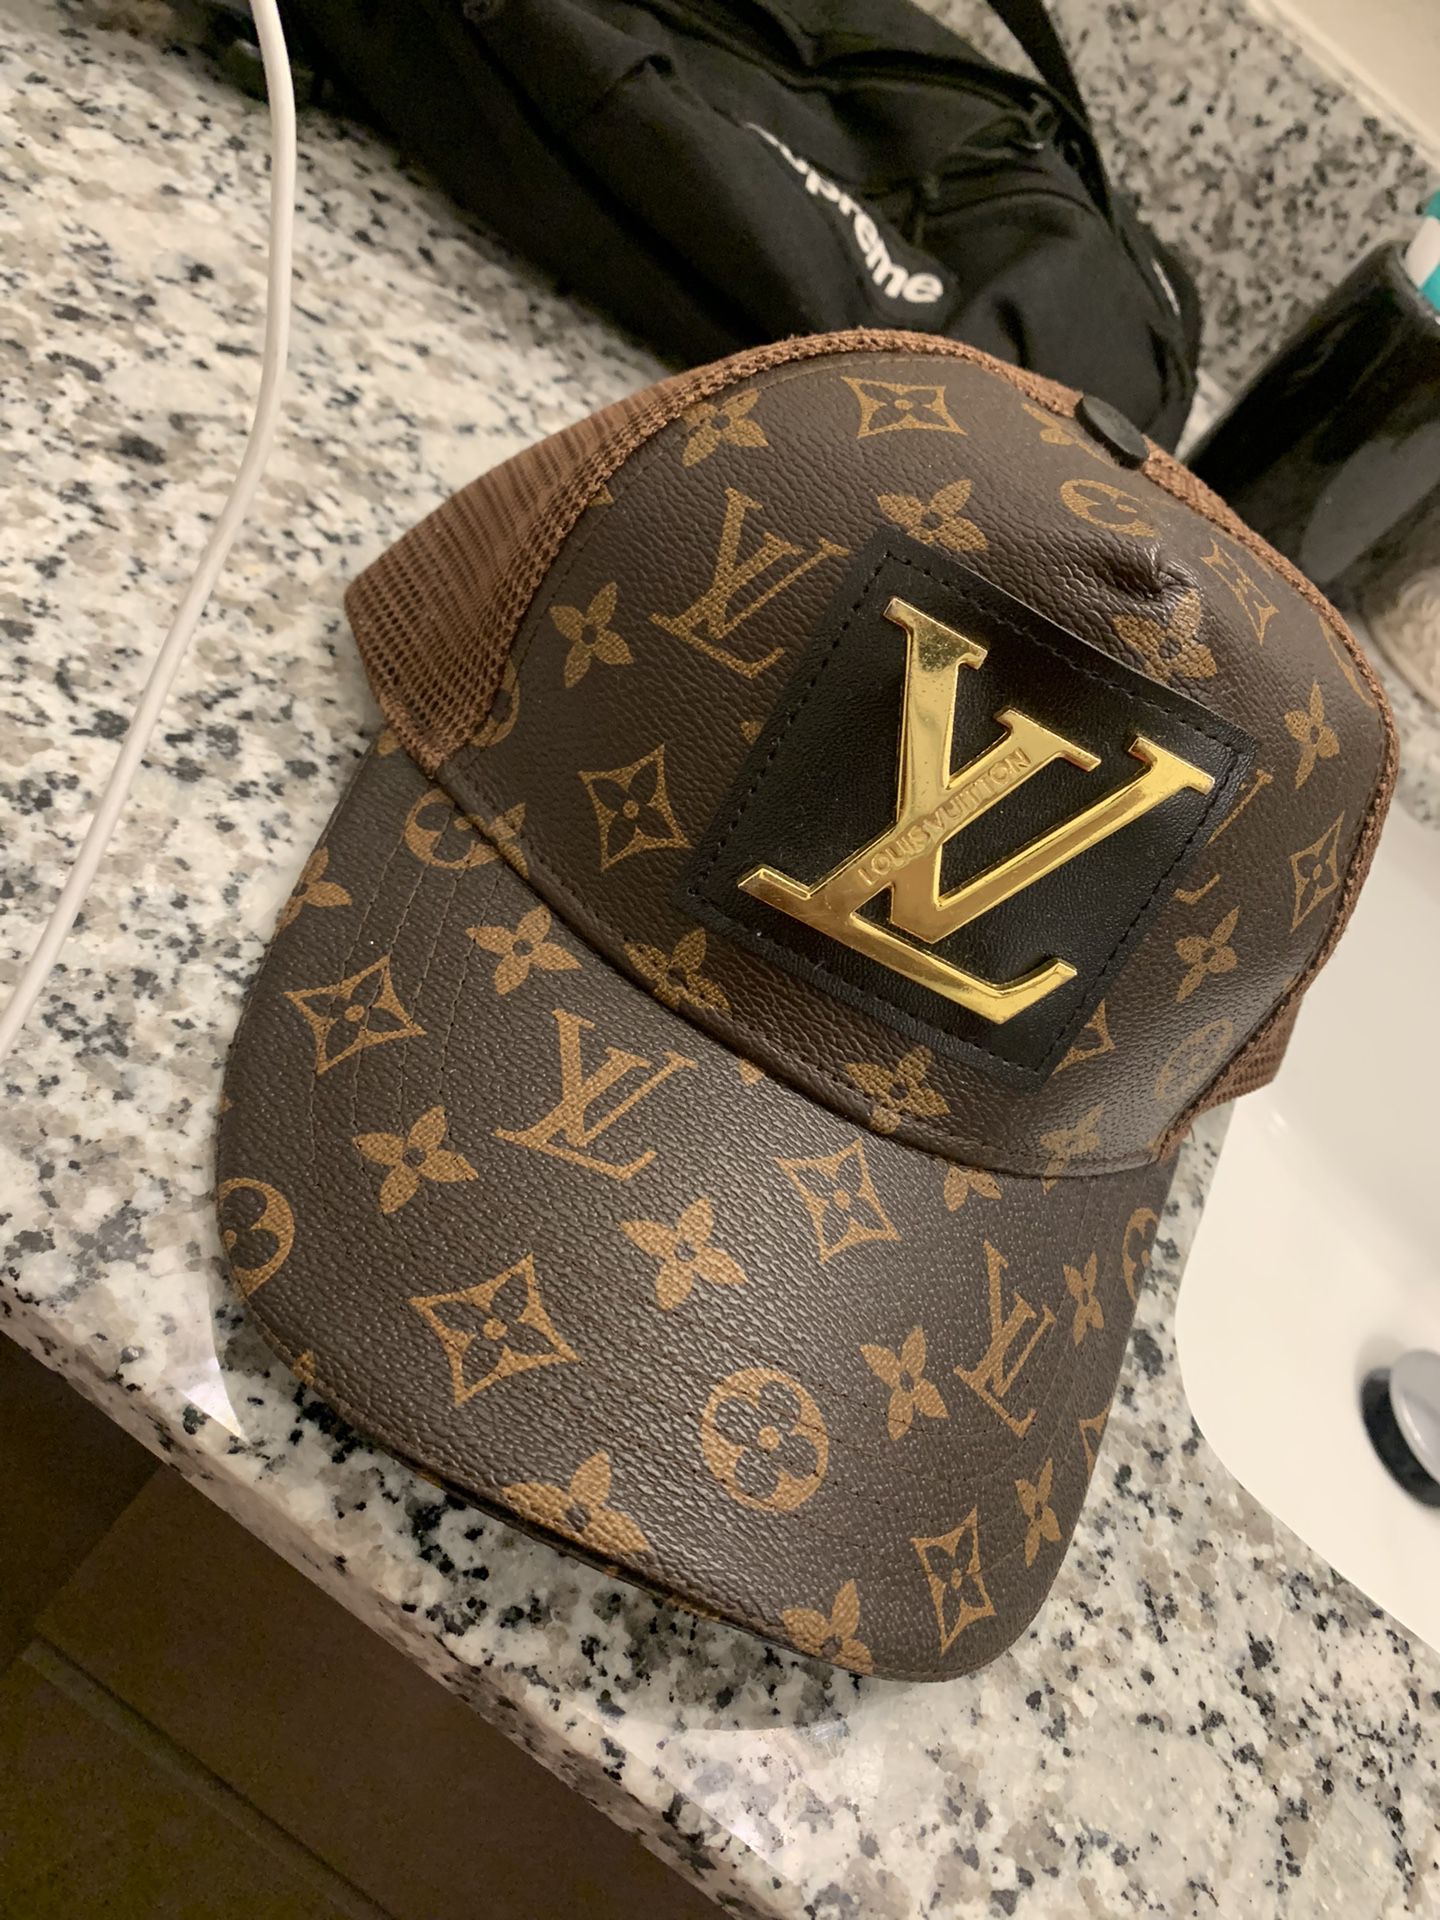 Louis Vuitton Hat And Scarf Set for Sale in New York, NY - OfferUp